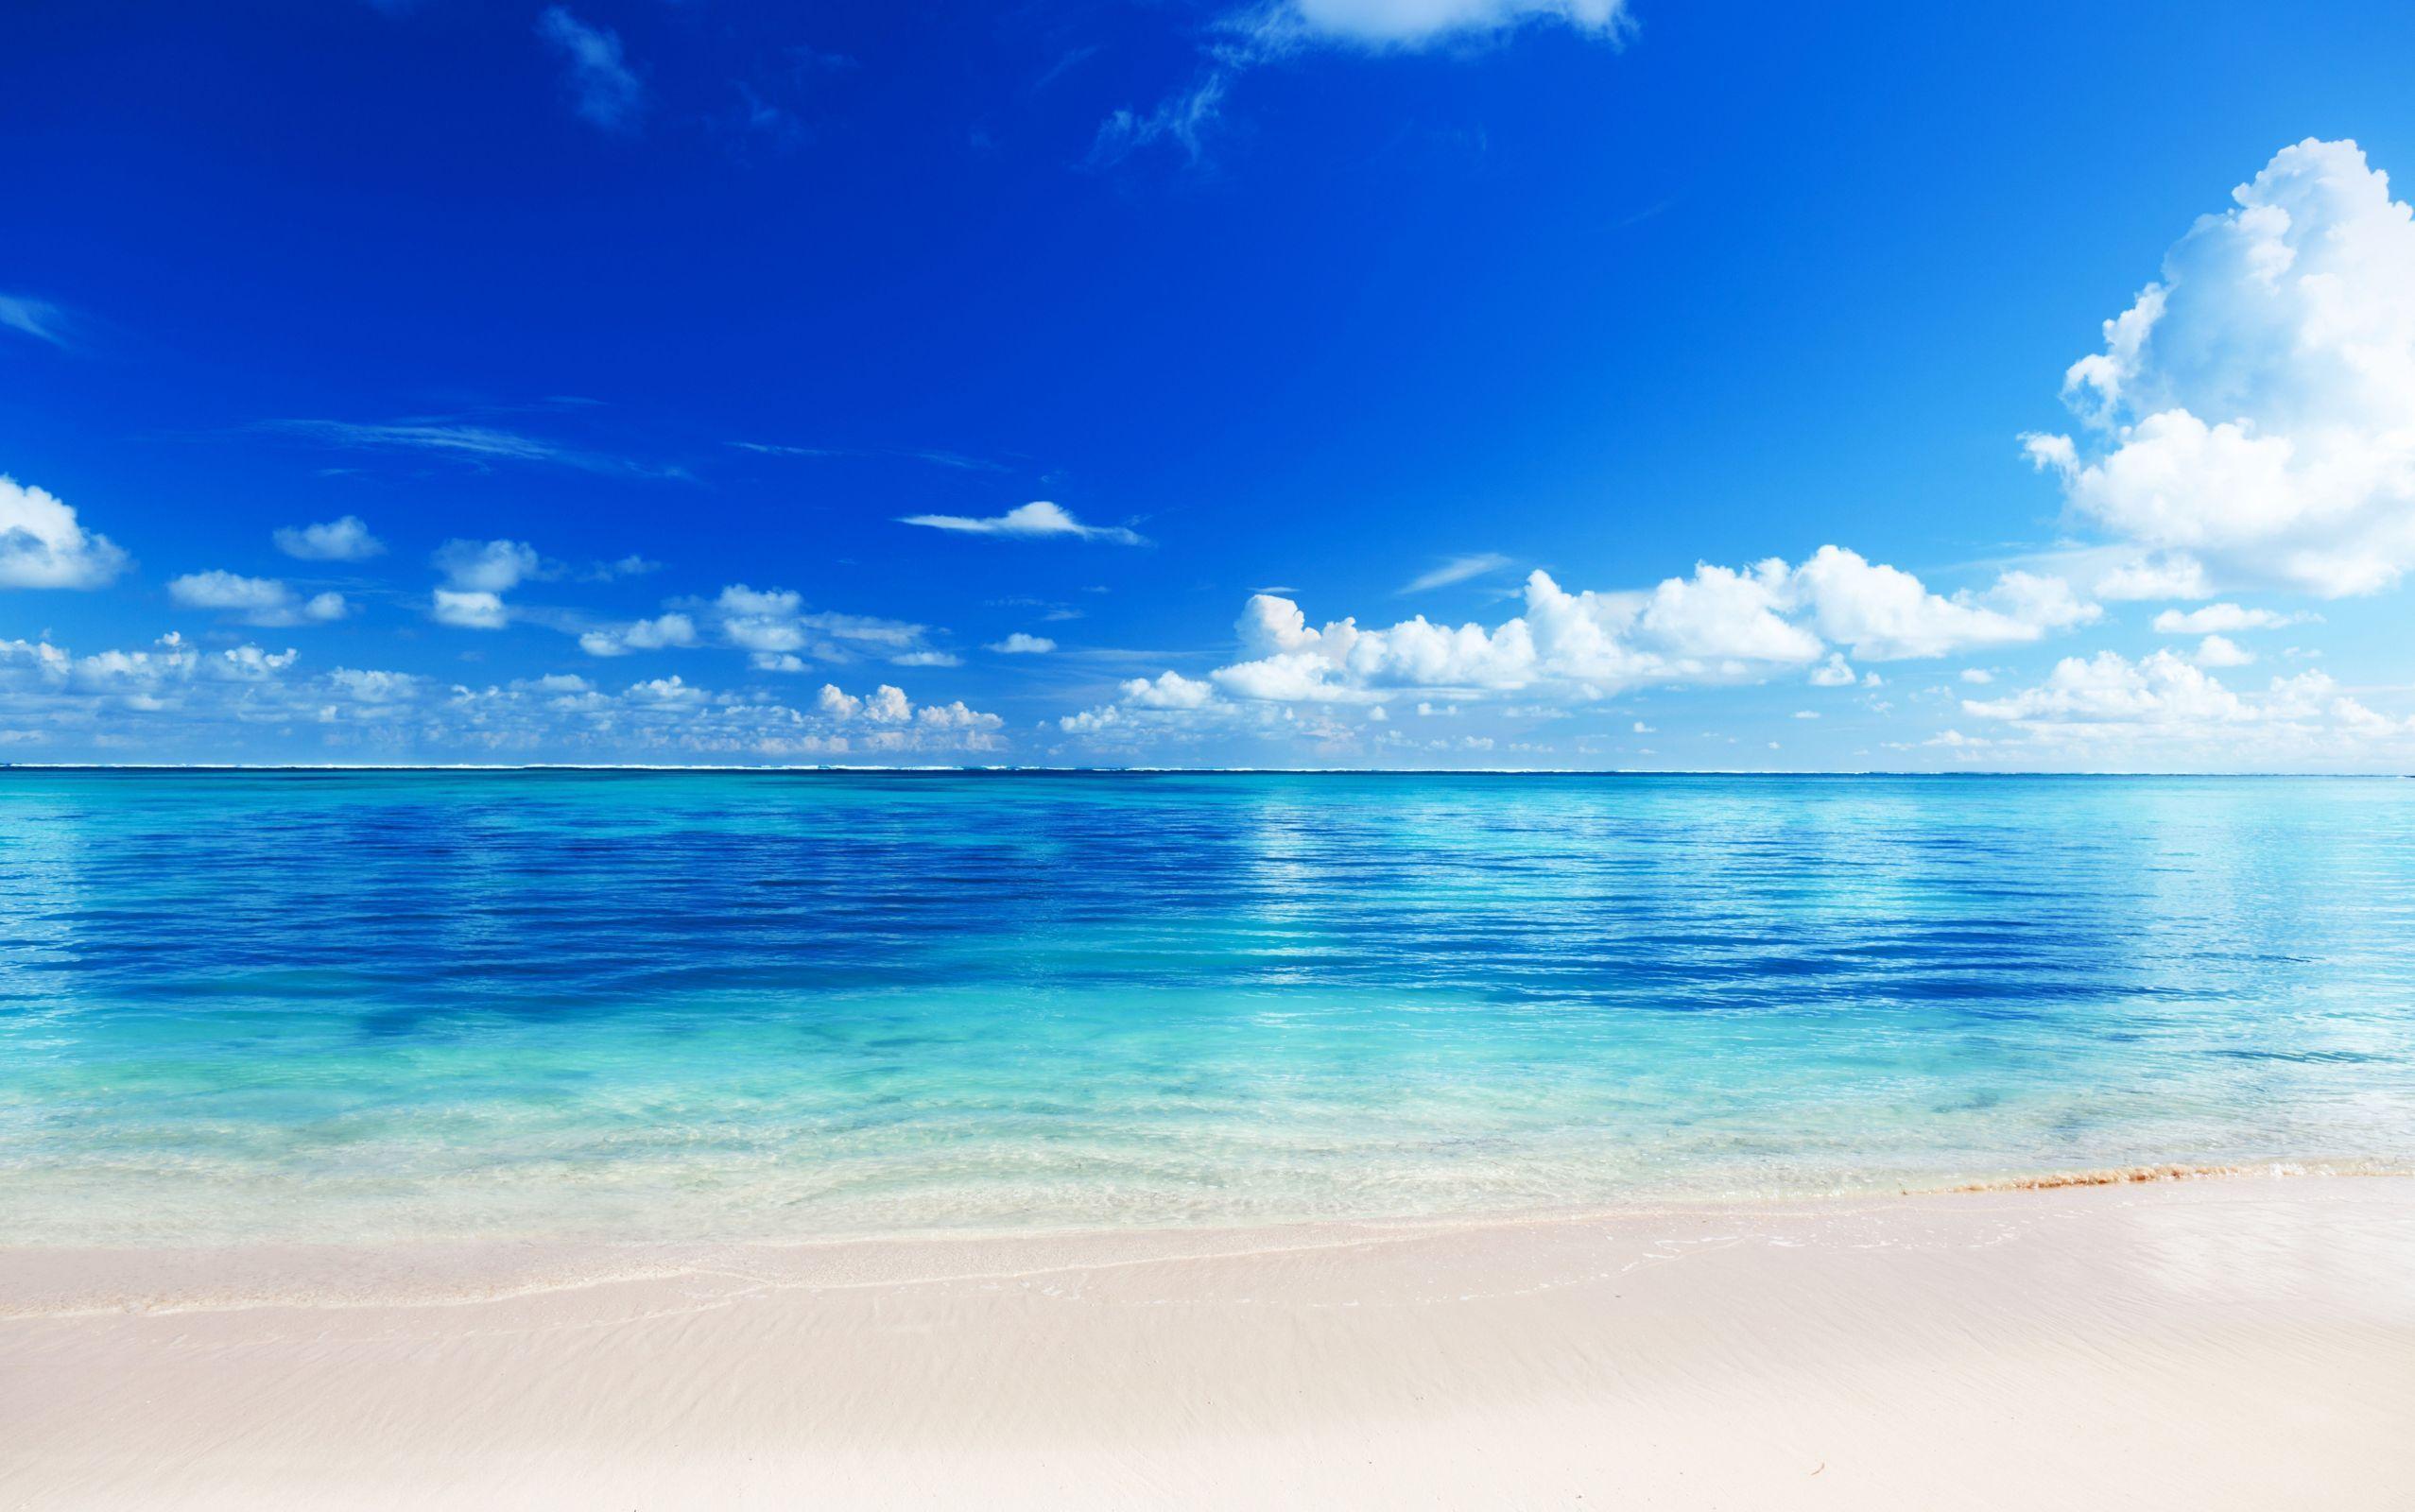  Beach Backgrounds Image 2555x1600